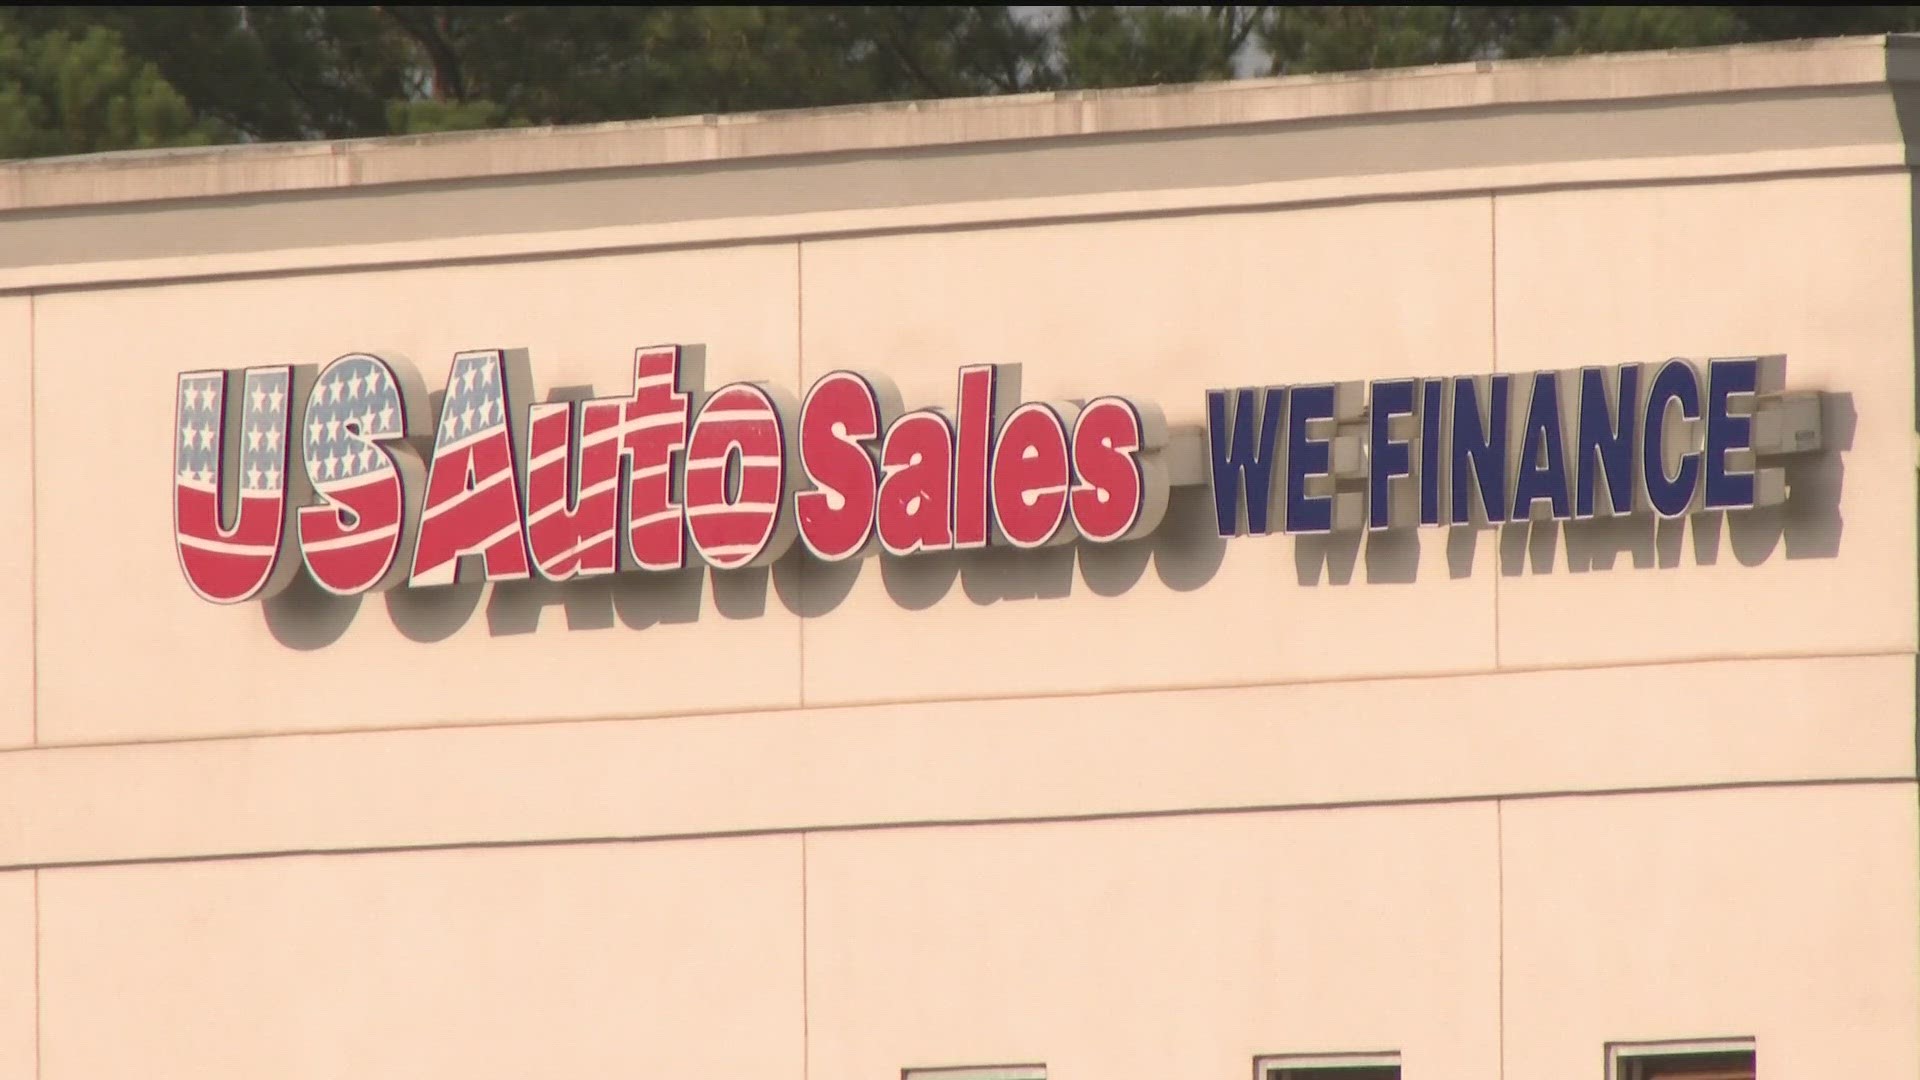 It's been four months since US Auto Sales abruptly sent employees home before shuttering more than 30 dealerships in the Southeast, including in Georgia.